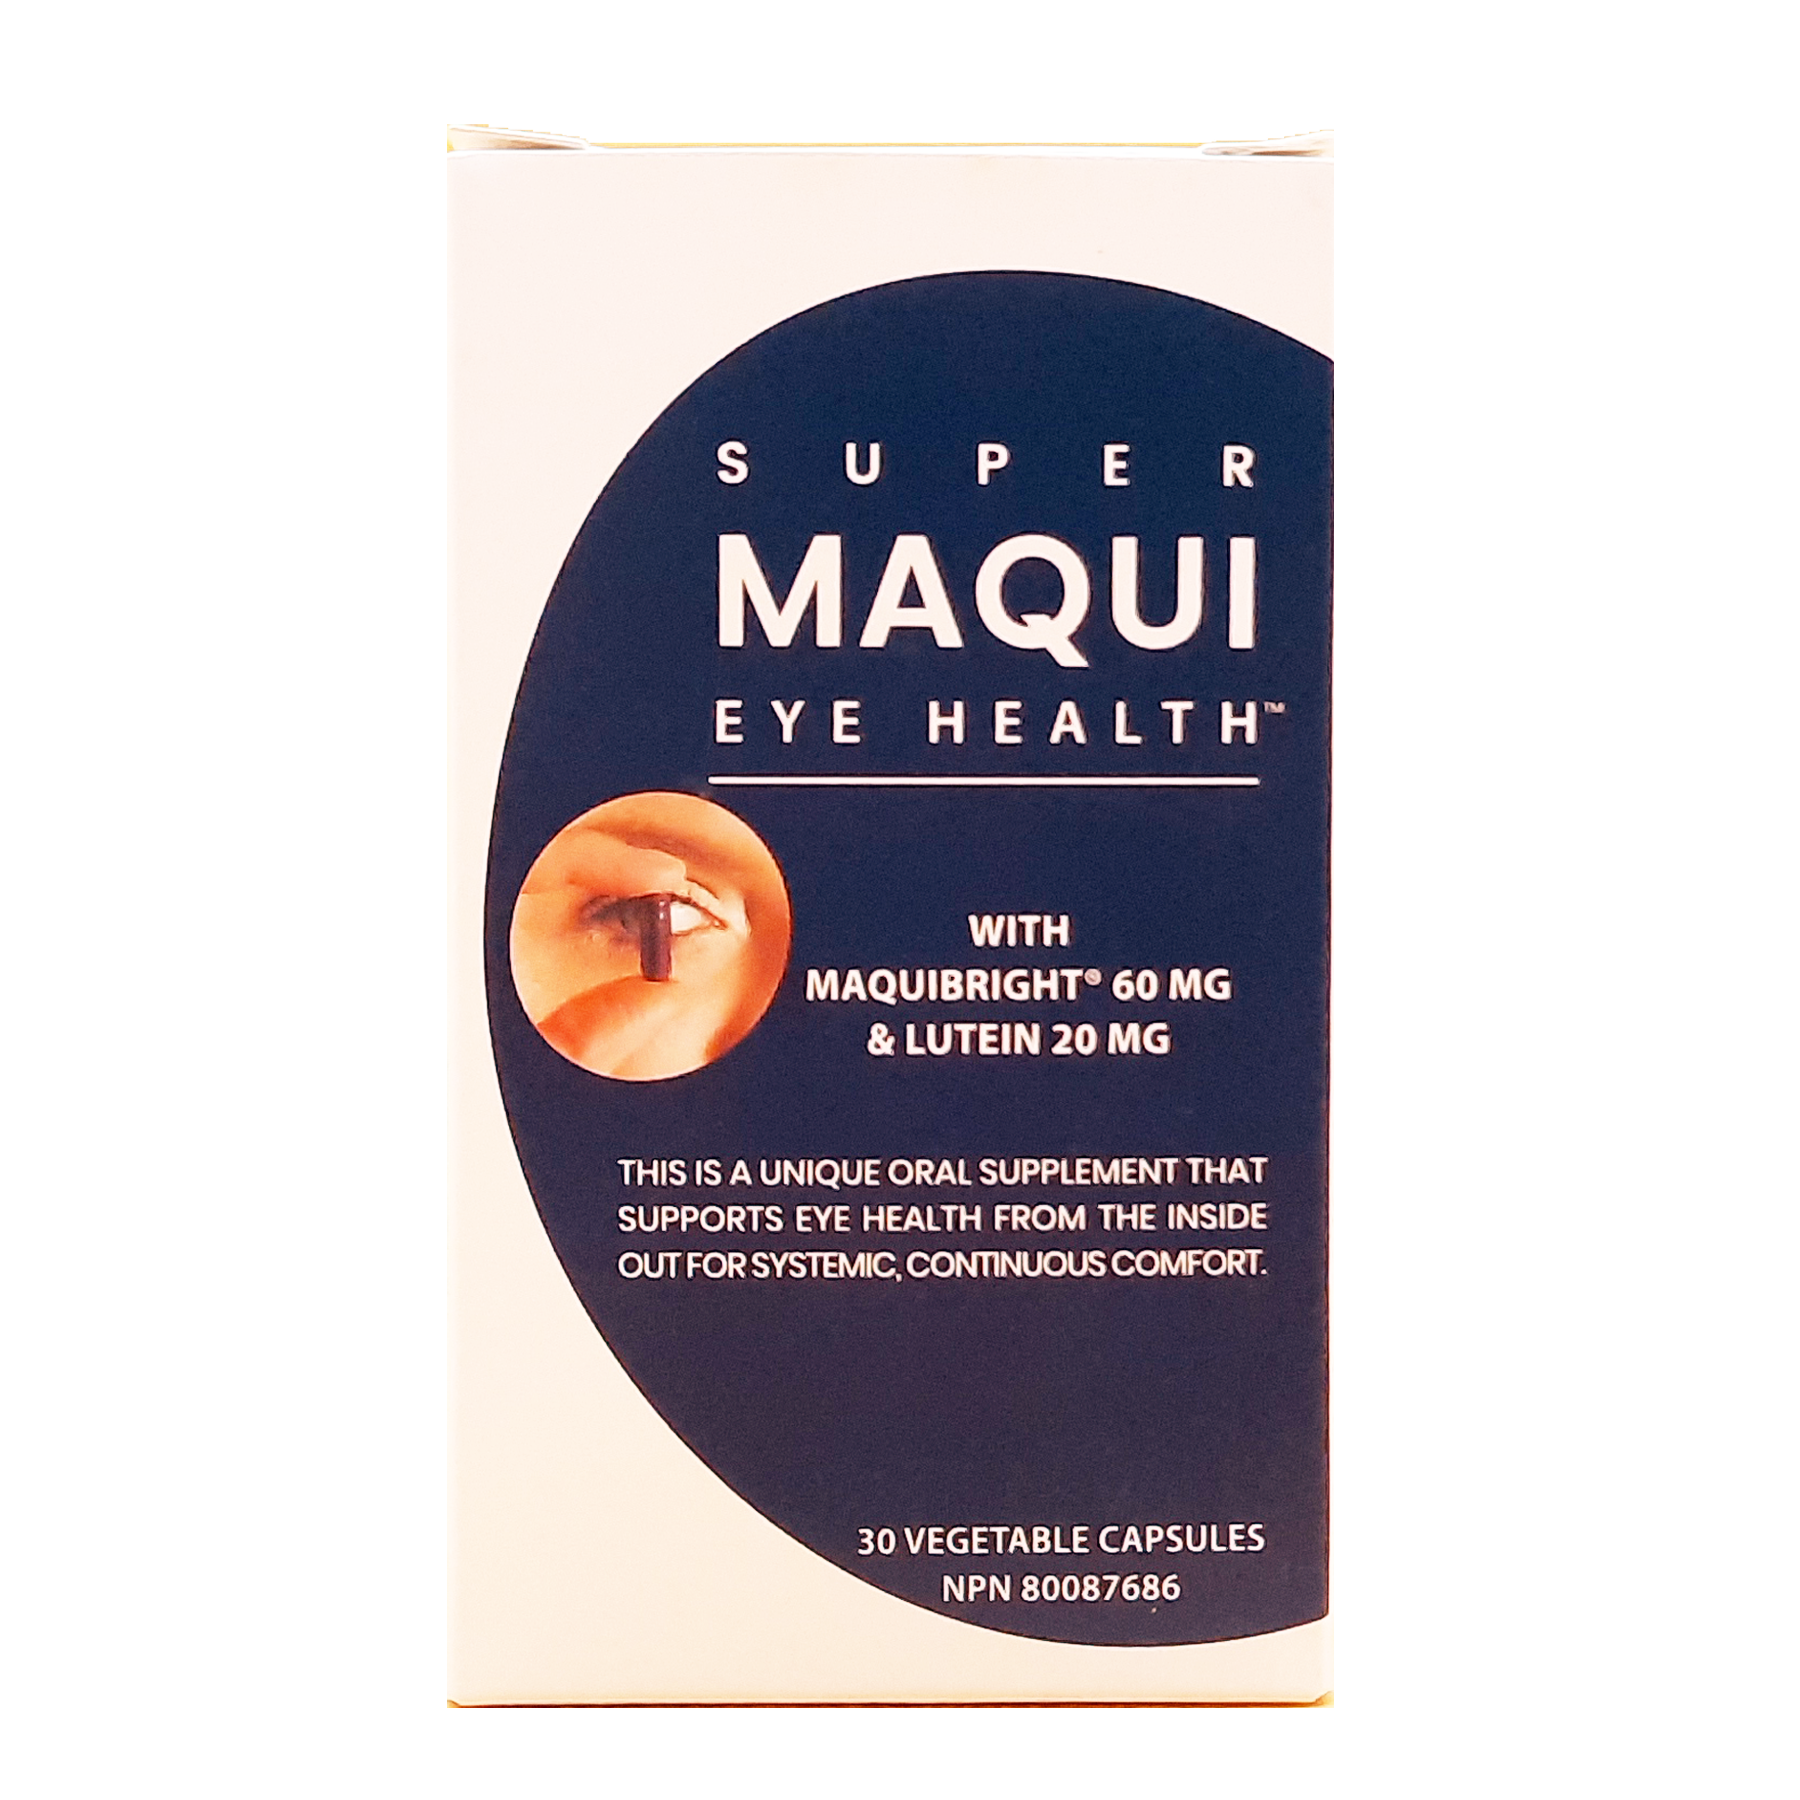 Super Maqui Eye Health with MaquiBright & Lutein 30 VCaps